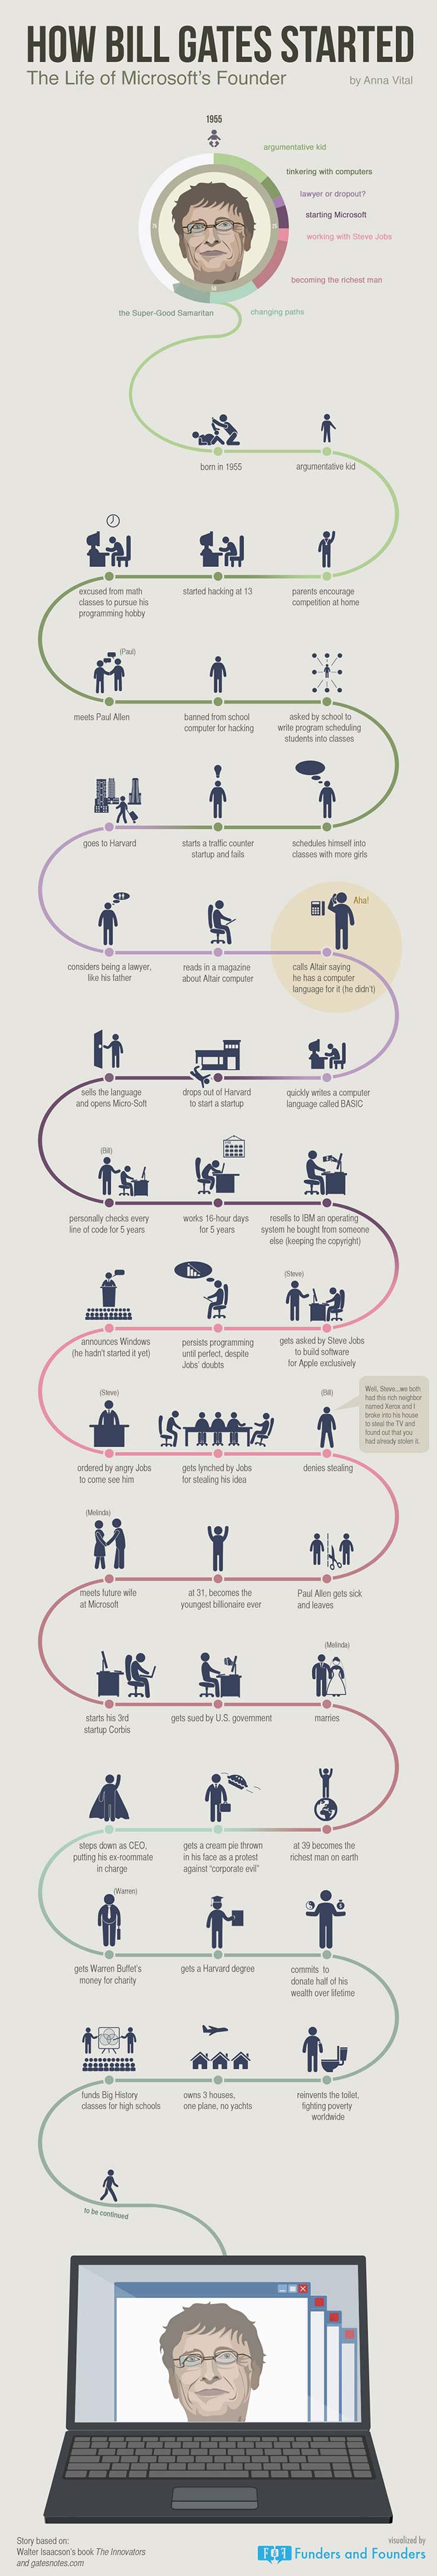 How-Bill-Gates-Started-Infographic